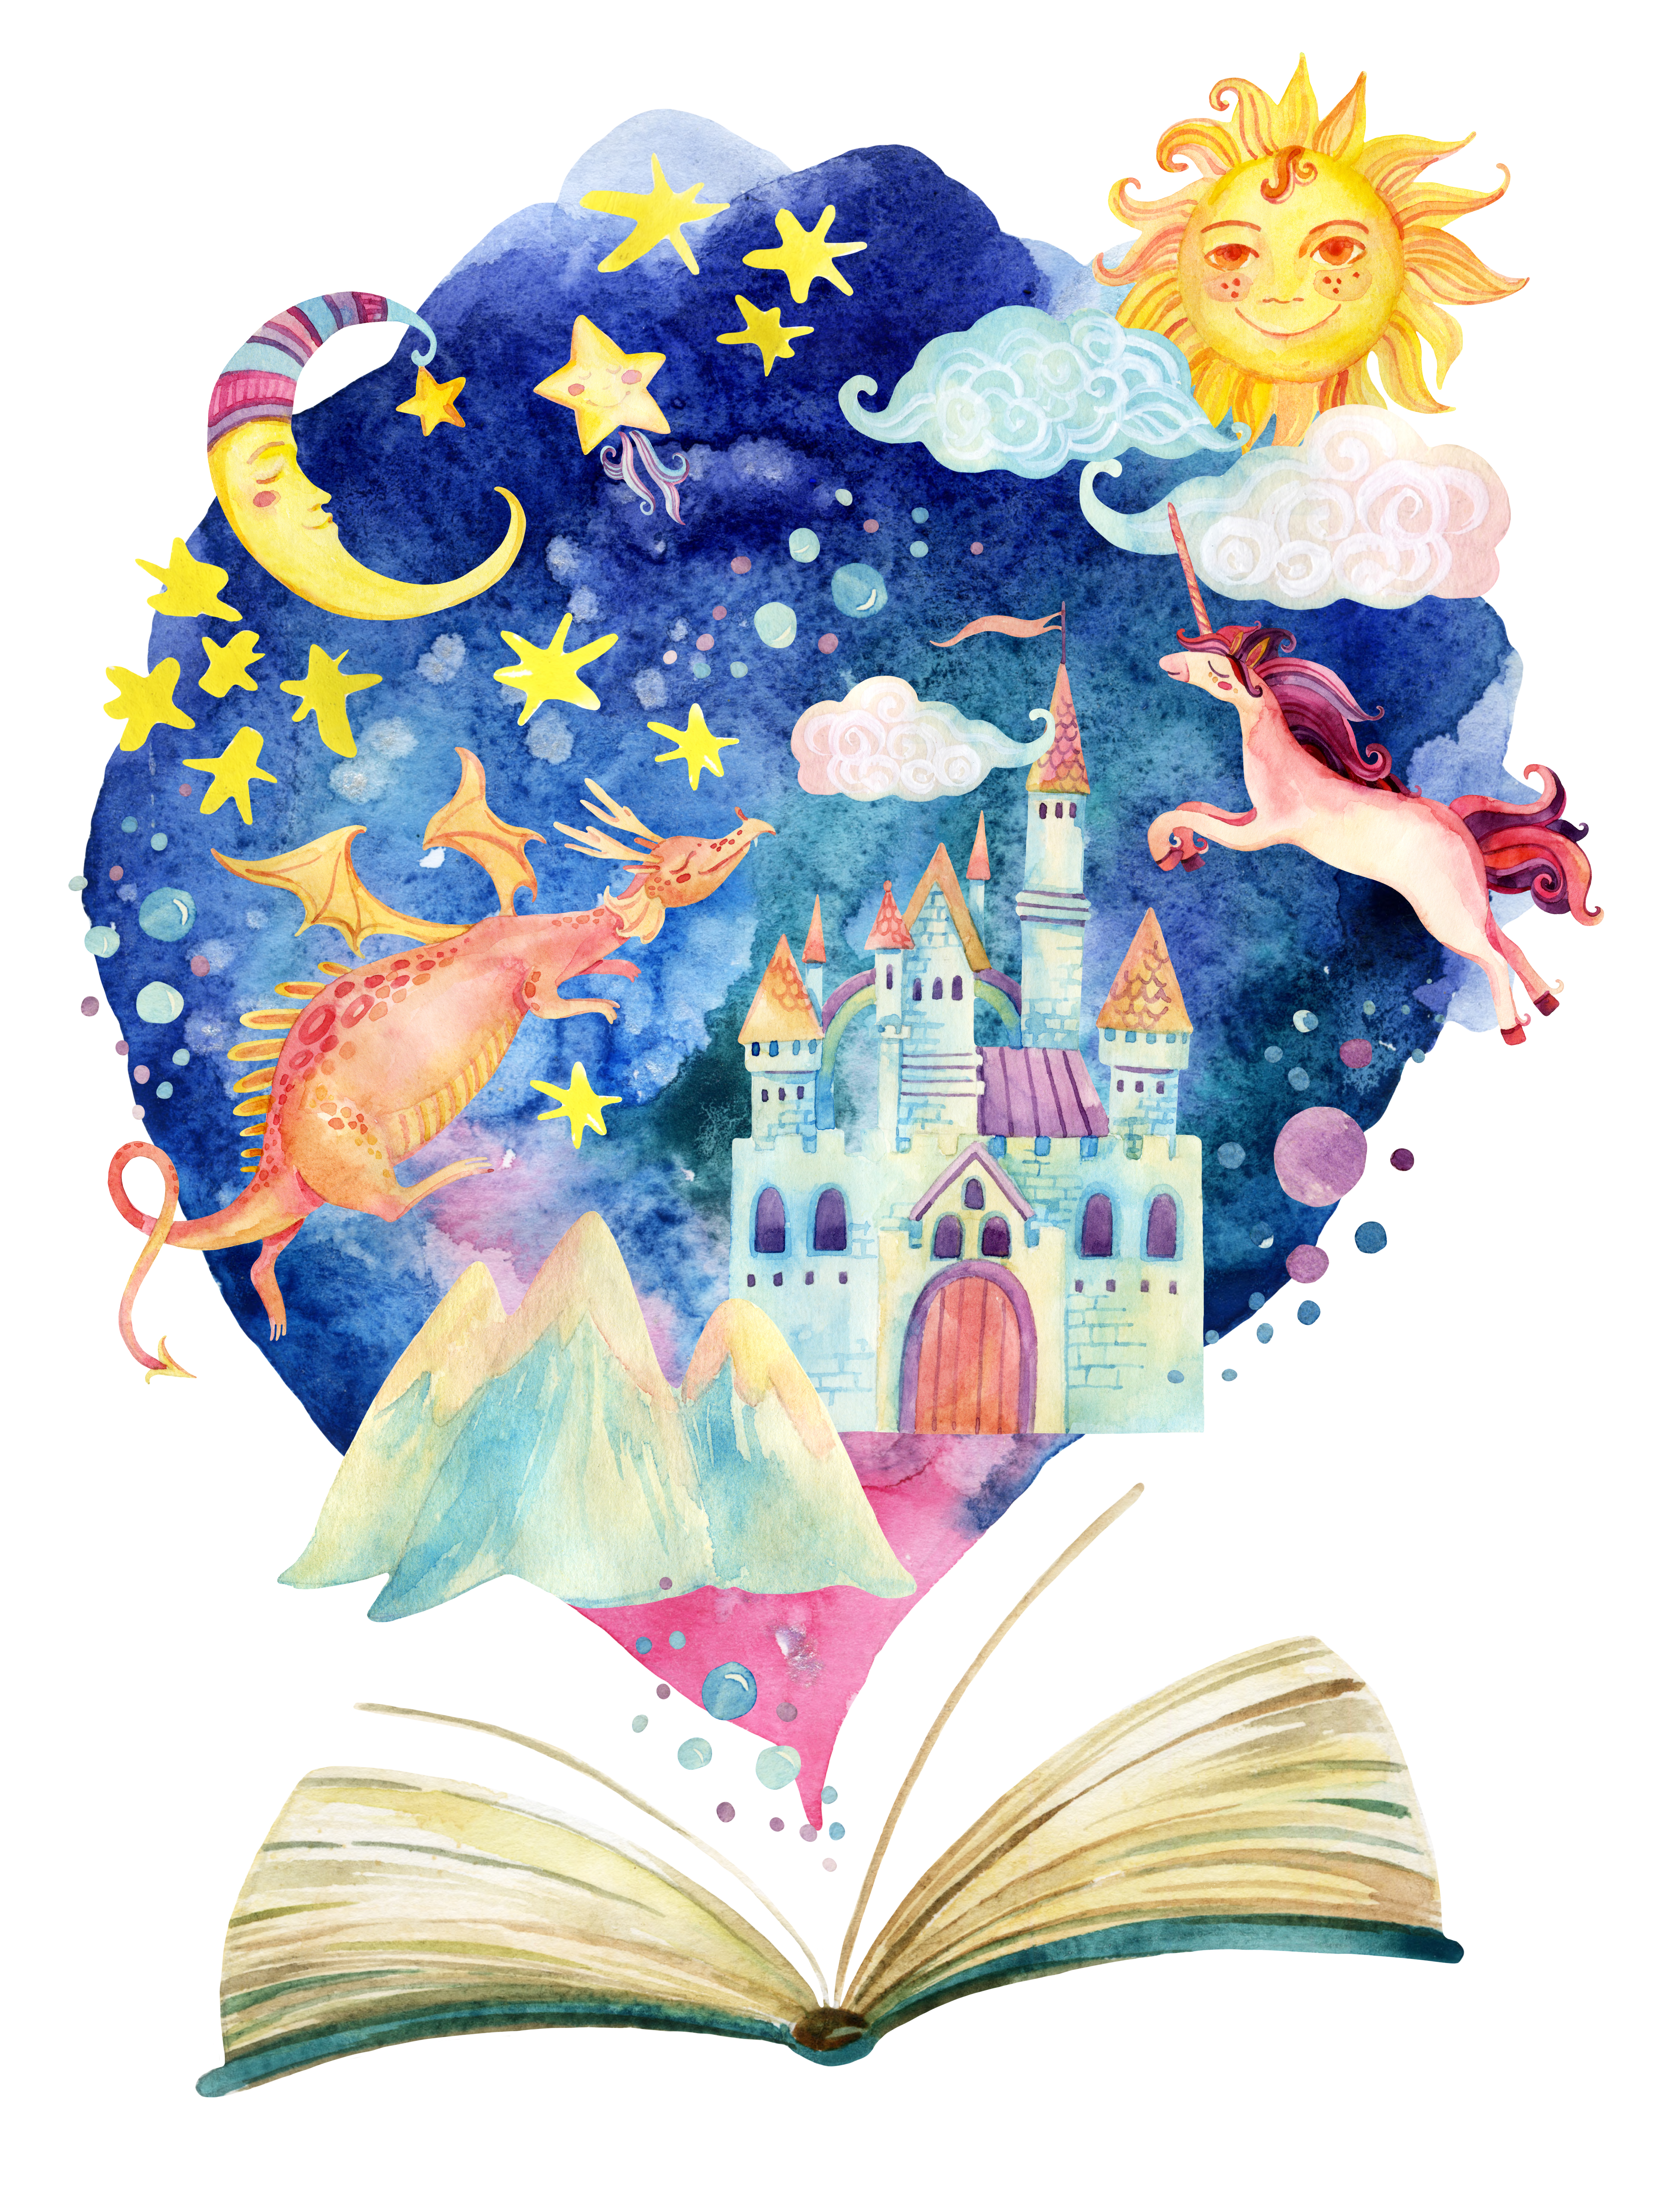 A moon, stars, sun, dragon, unicorn, mountain, and castle floating above an open book.